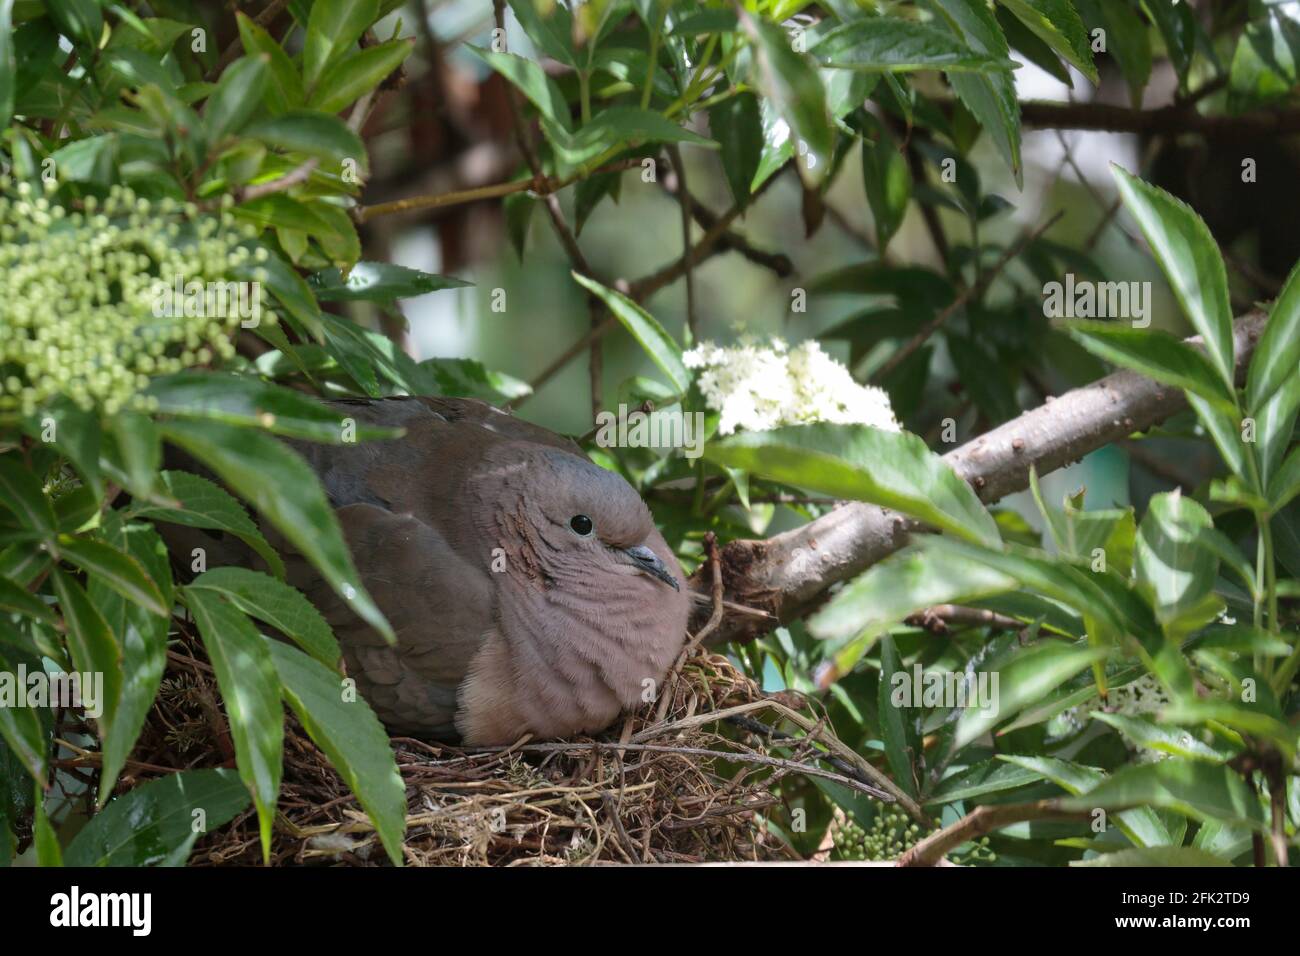 EARED DOVE (Zenaida auriculata), a female of this type of pigeon incubating her eggs in her temporary nest, a rare image. Huancayo - Peru Stock Photo